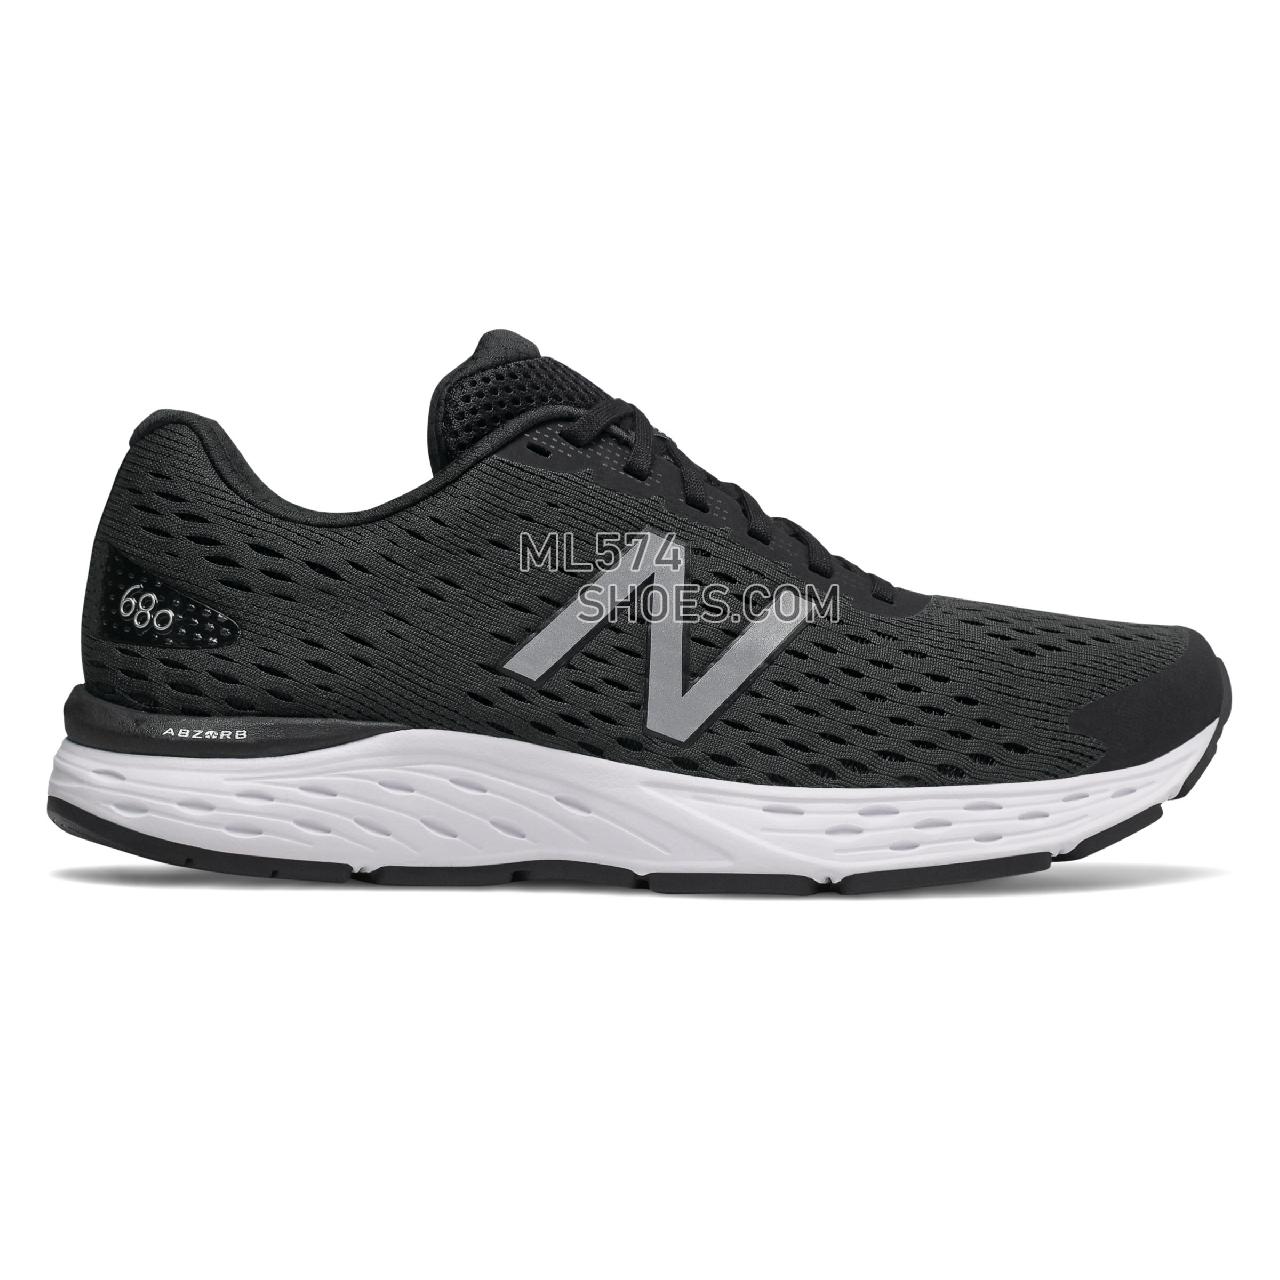 New Balance 680v6 - Men's Classic Sneakers - Black with Silver Metallic and White - M680LK6